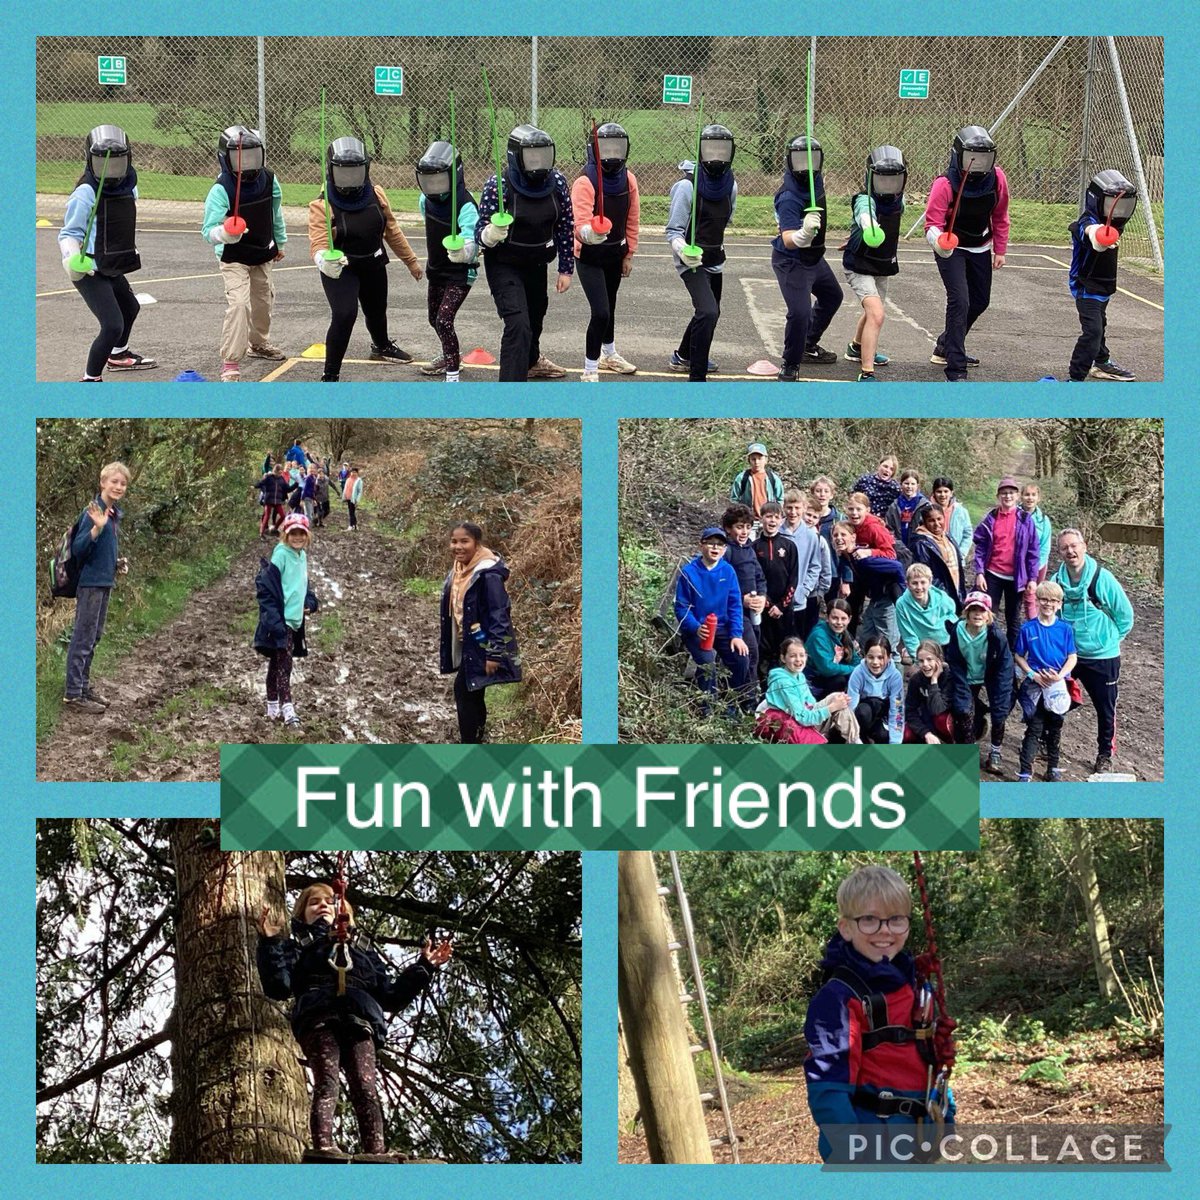 More memories being made on our adventure week in #Devon. Everyone is throwing themselves into the activities. #OutdoorAdventures #outdoorlearning